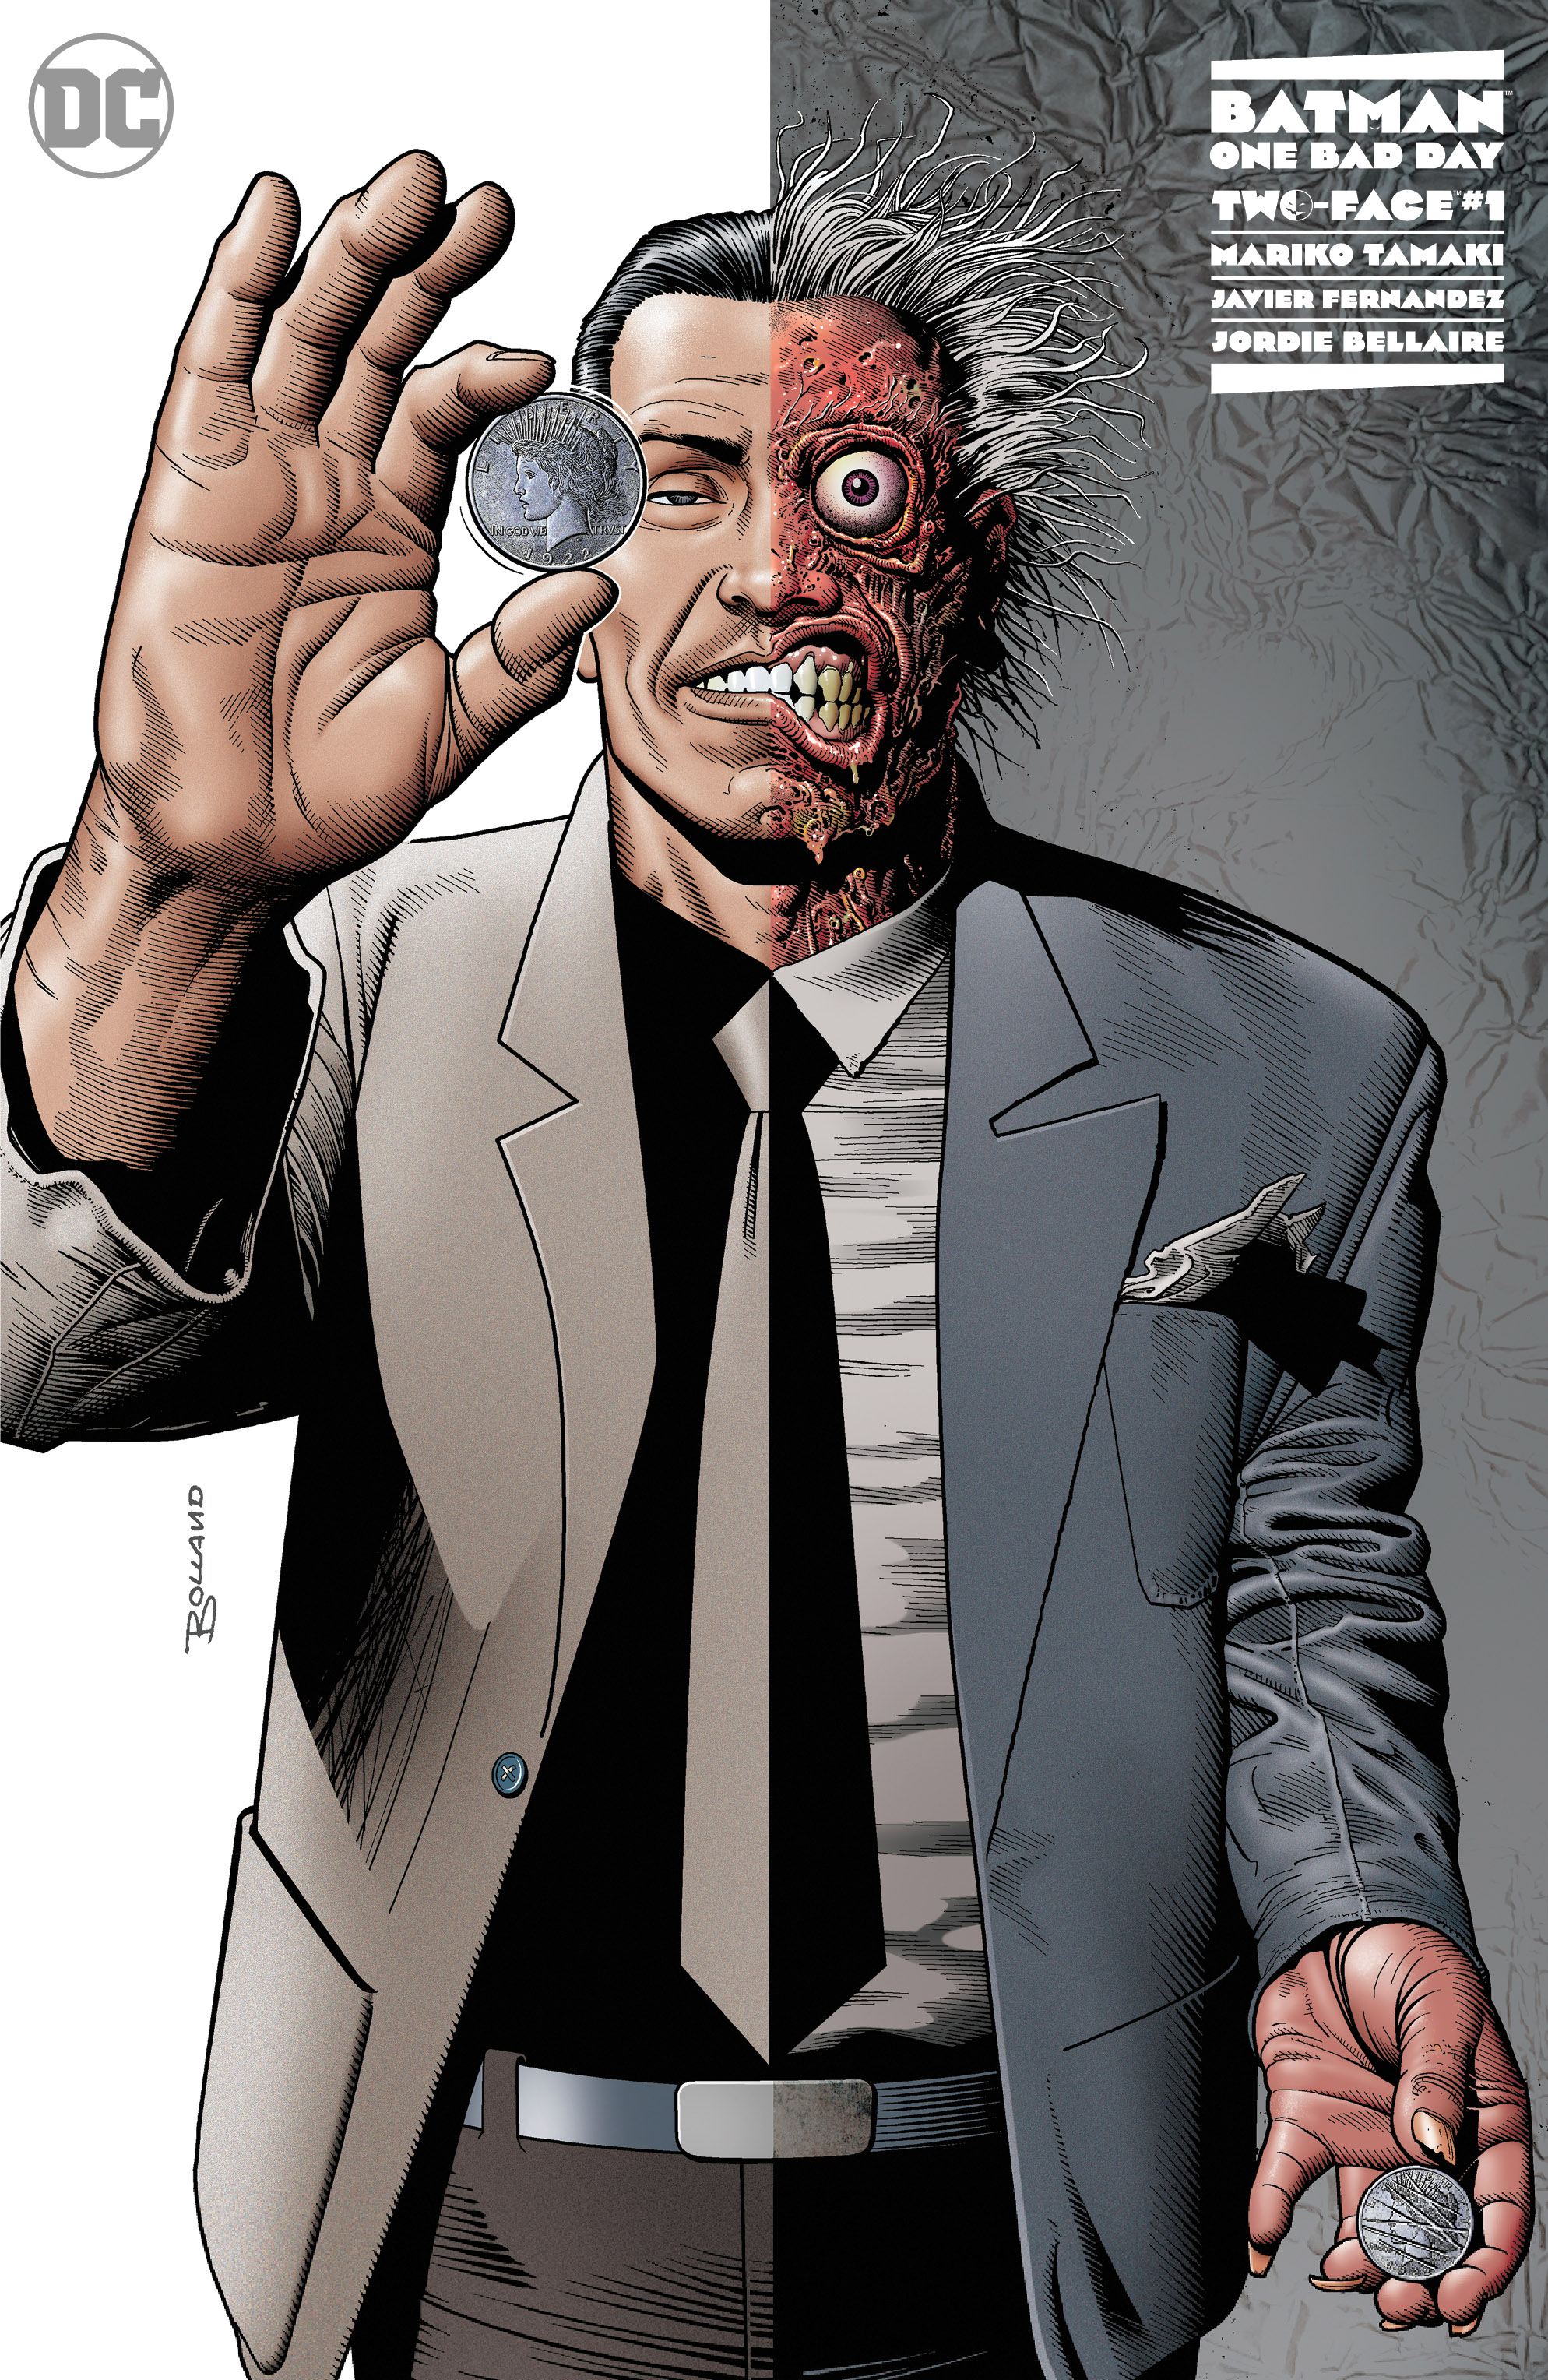 Batman One Bad Day Two-Face #1 (One Shot) Cover E 1 For 100 Incentive Brian Bolland Variant